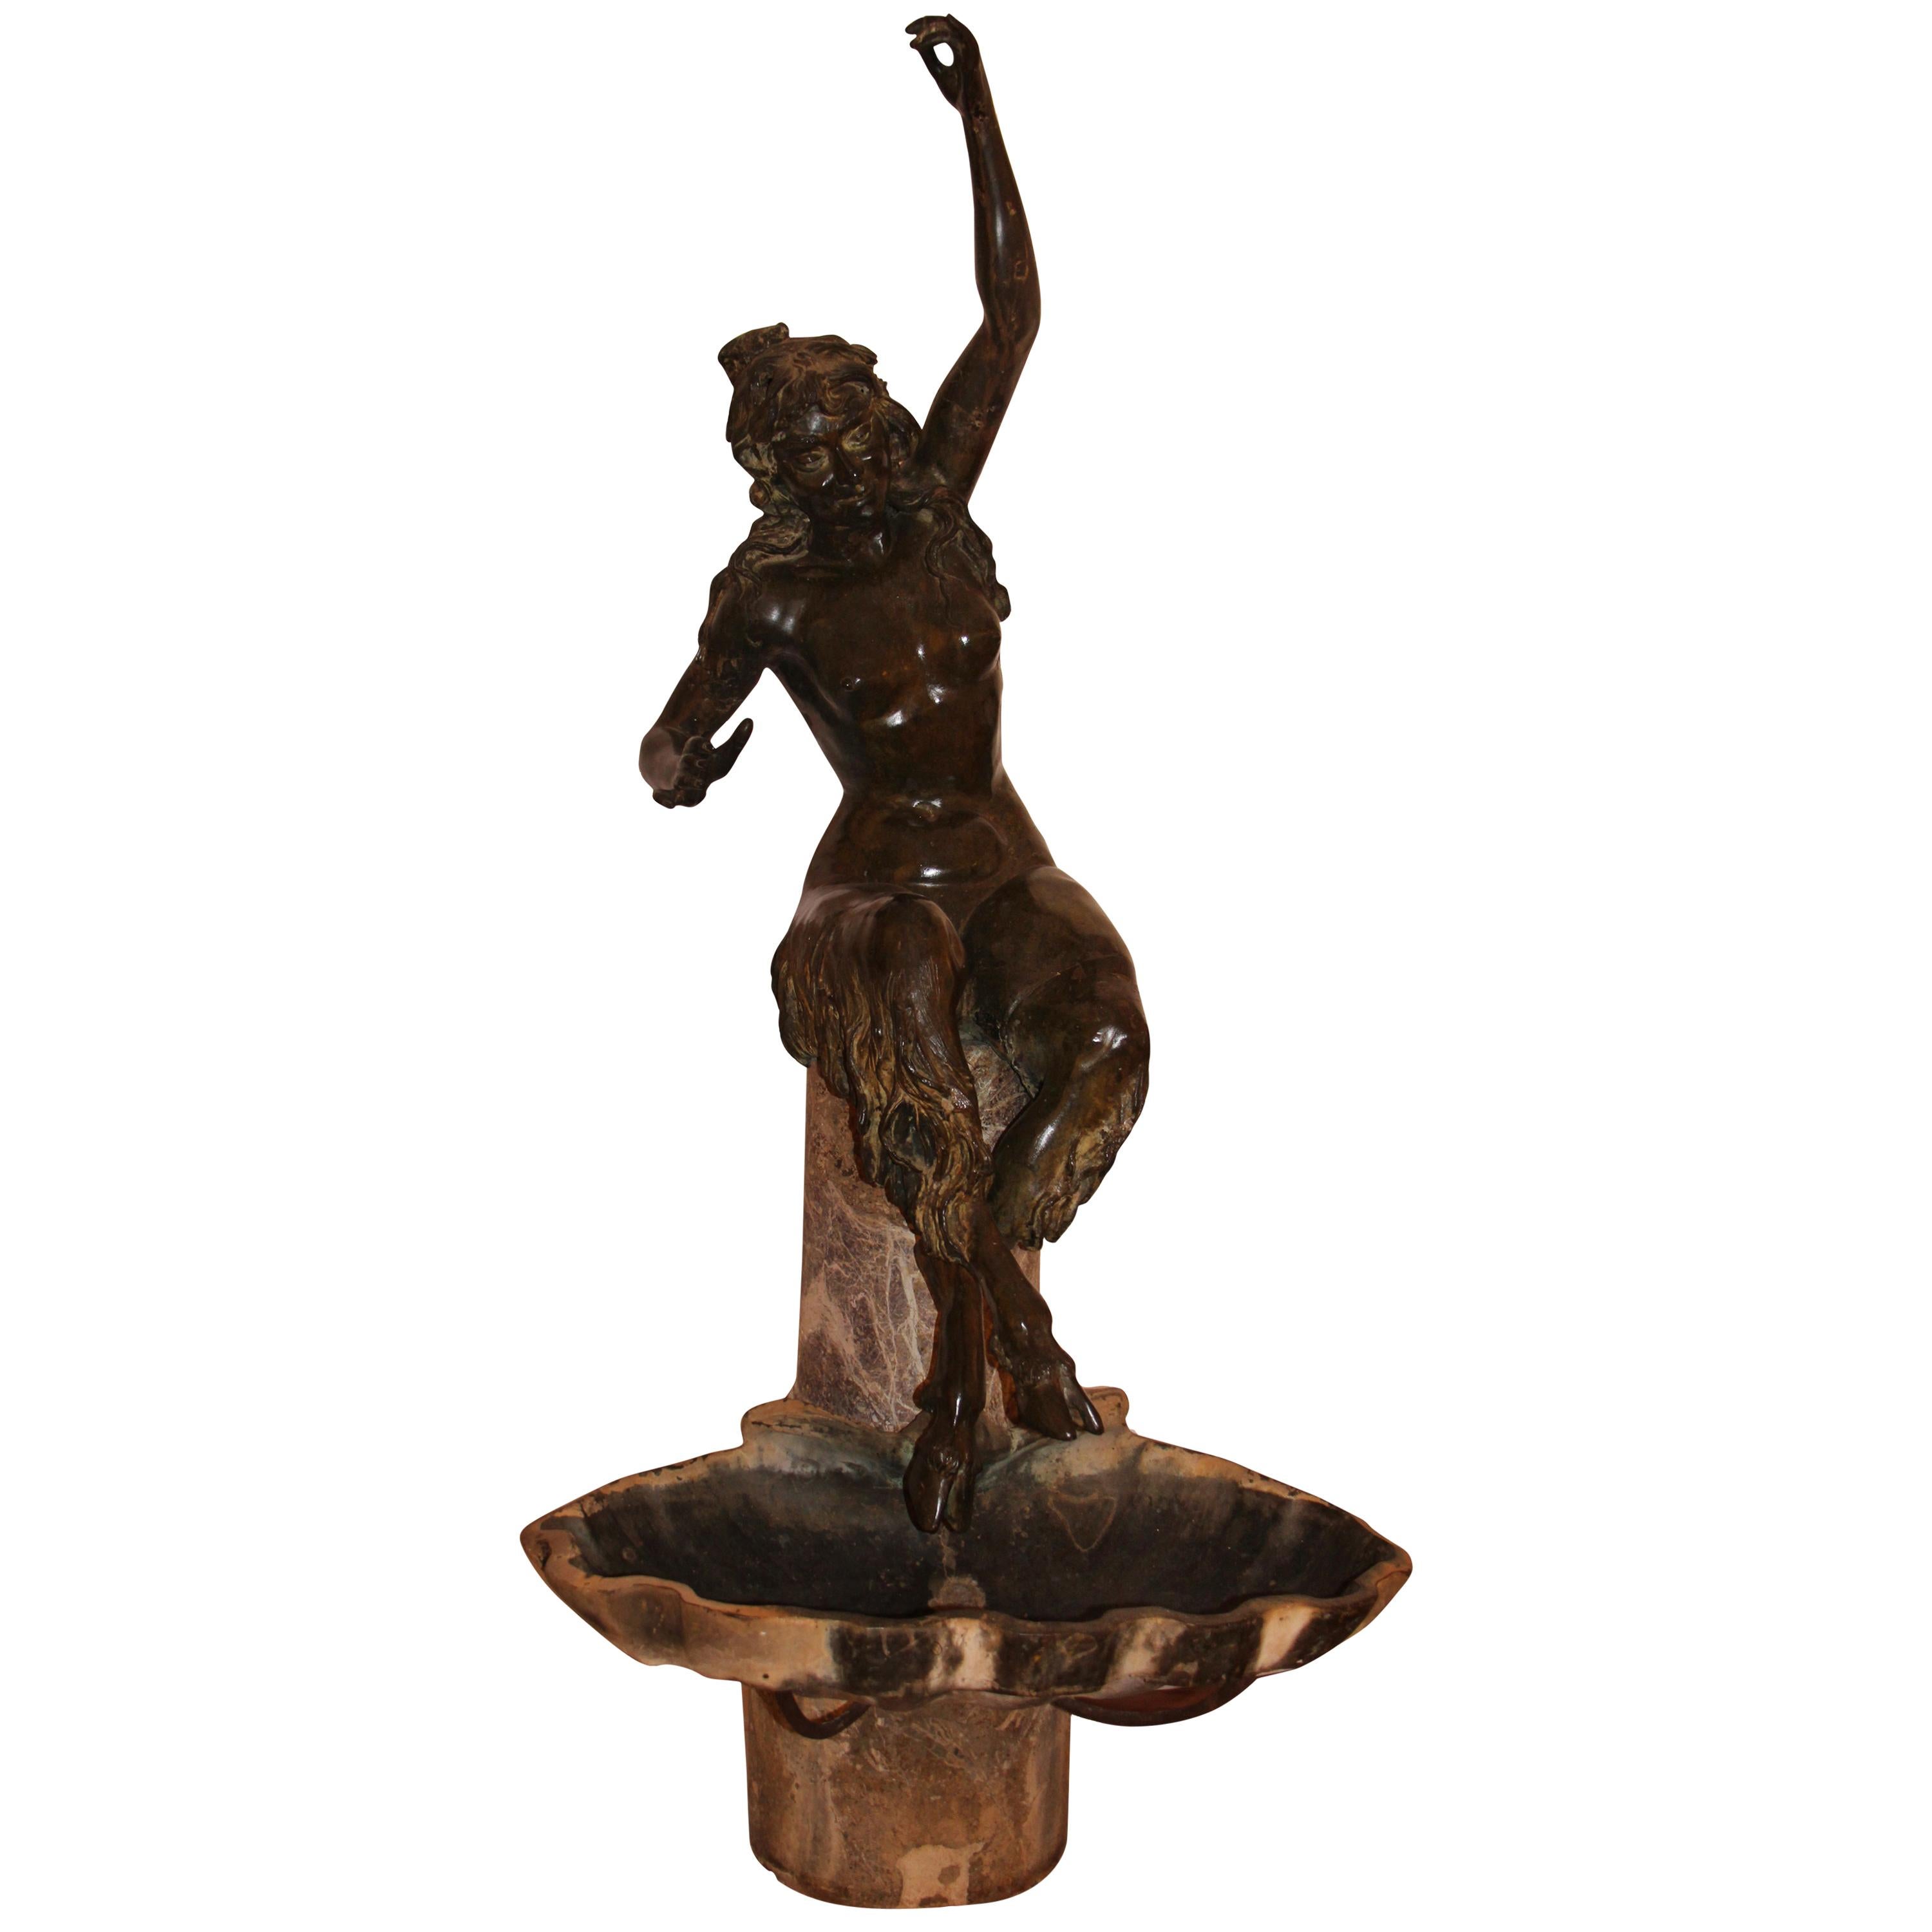 Fine and monumental patinated figure bronze title 